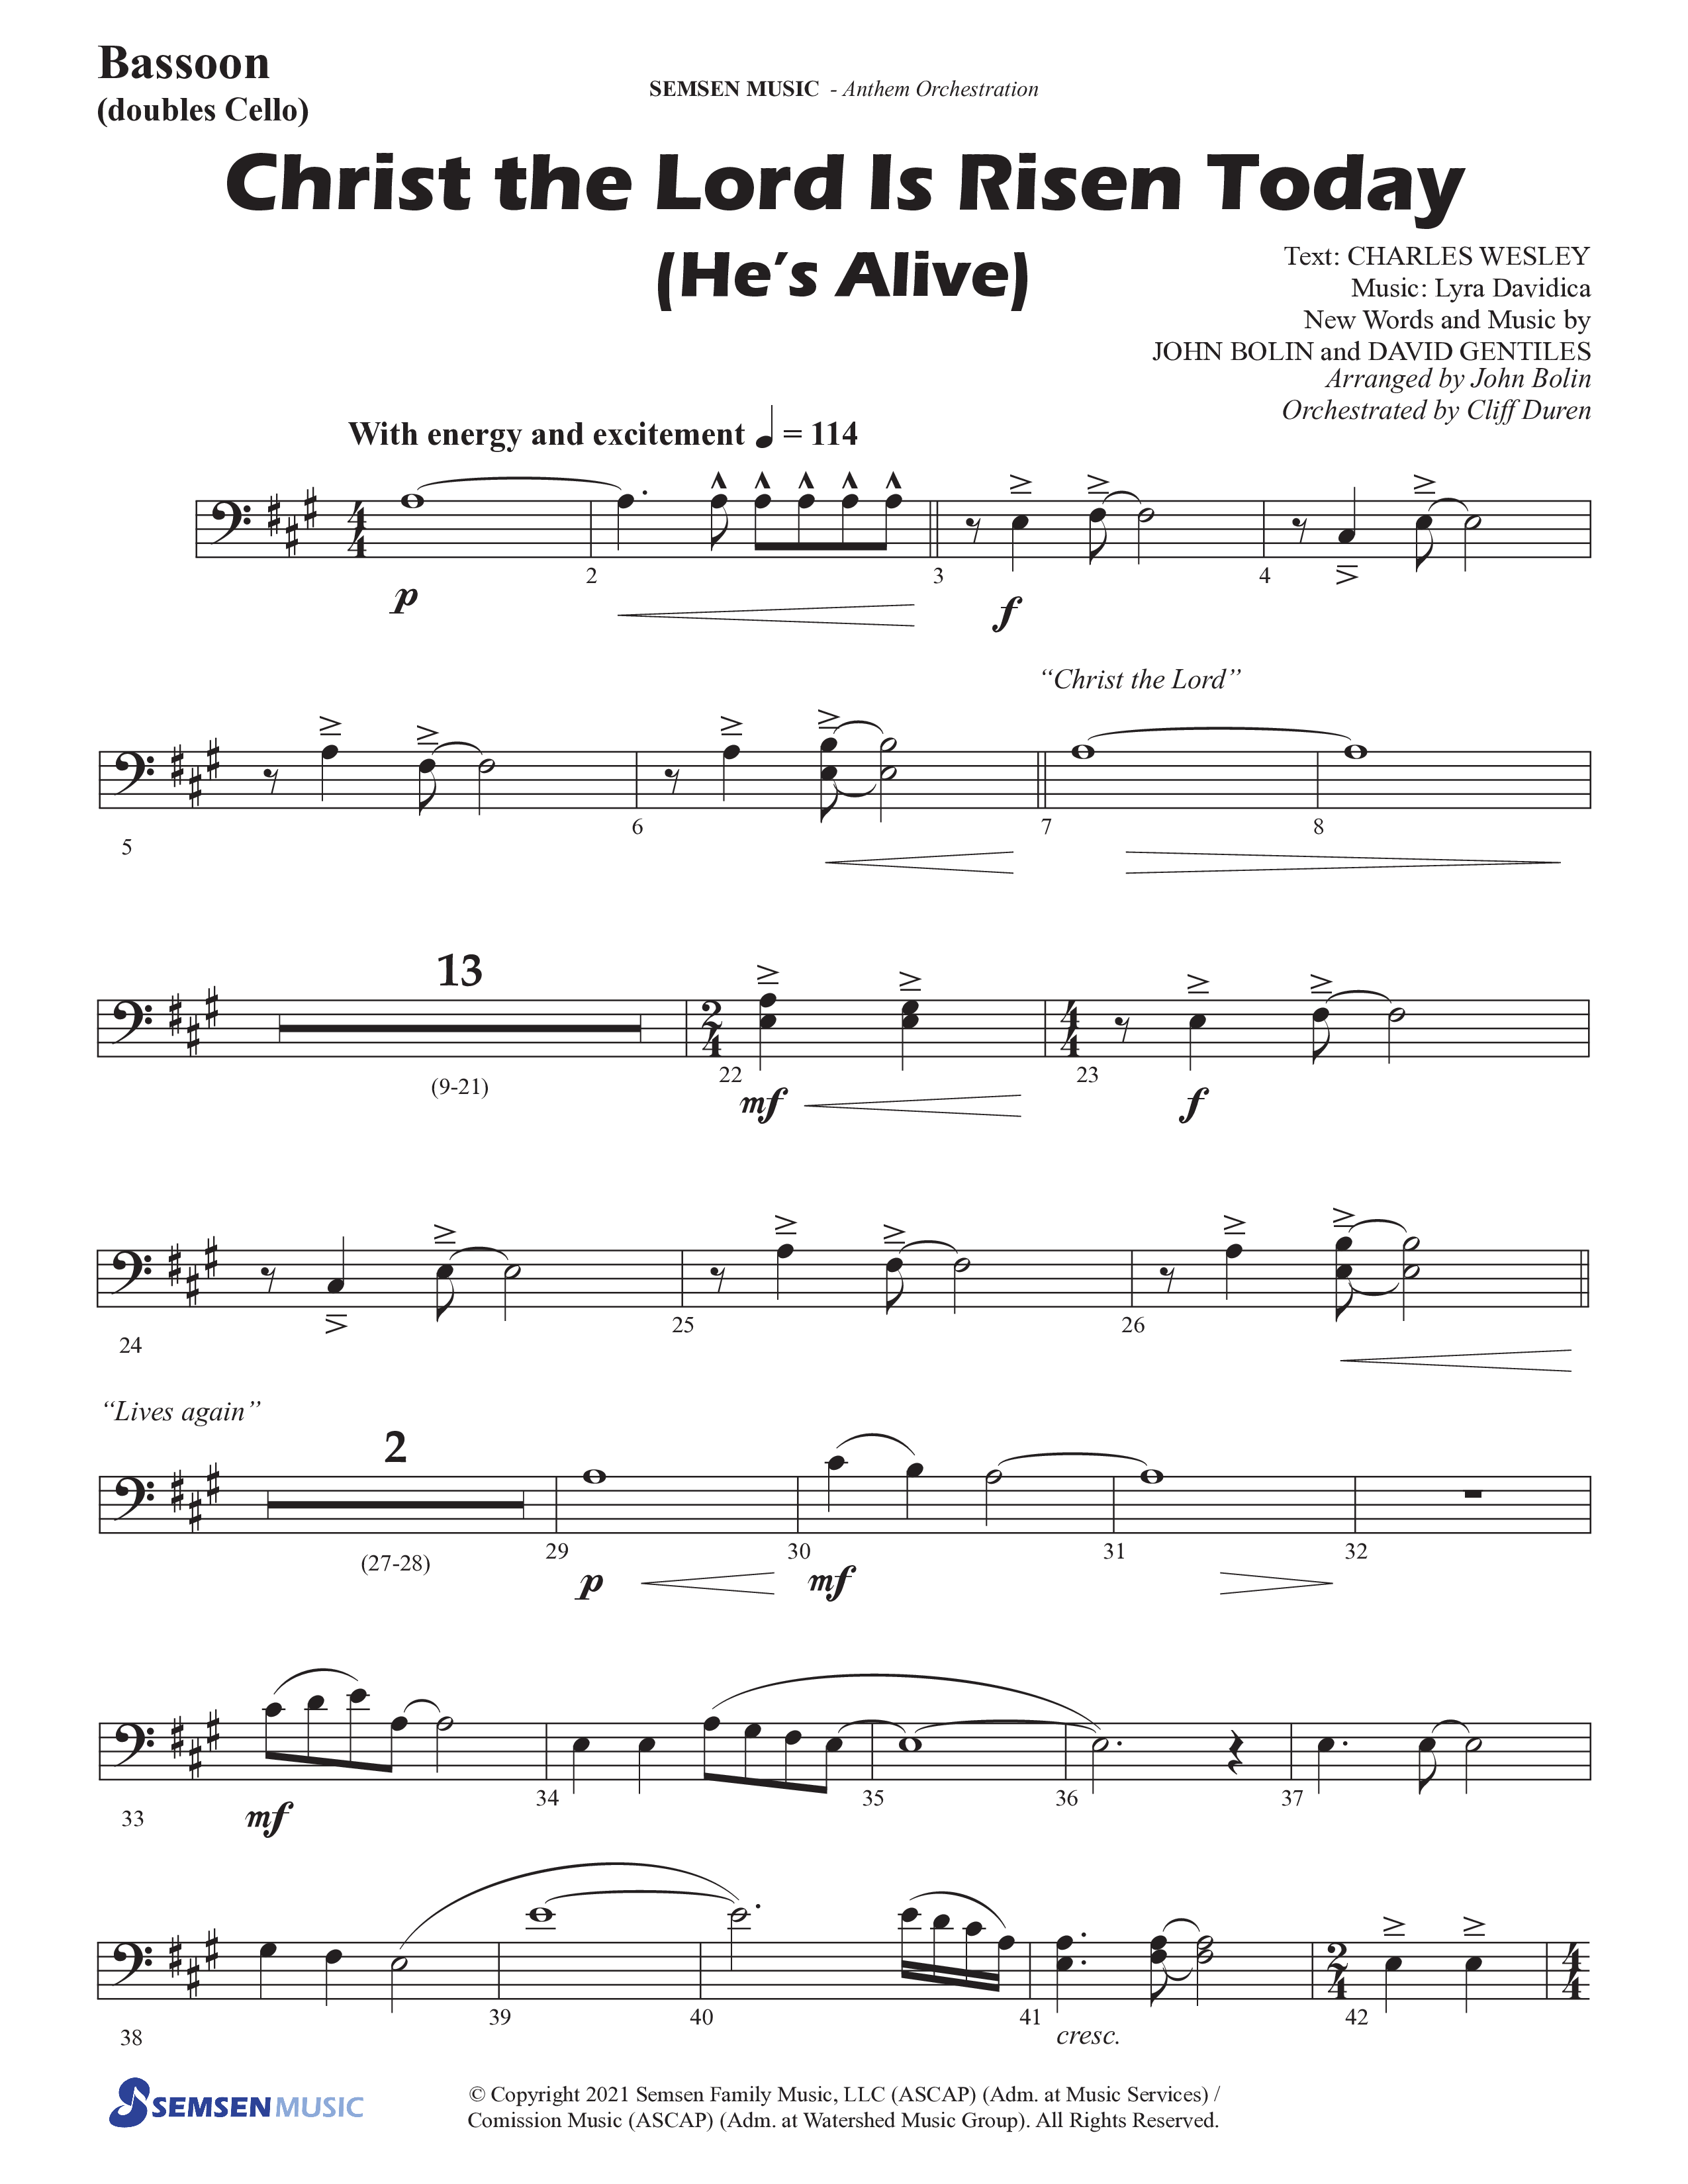 Christ The Lord Is Risen Today (He's Alive) (Choral Anthem SATB) Bassoon (Semsen Music / Arr. John Bolin / Orch. Cliff Duren)